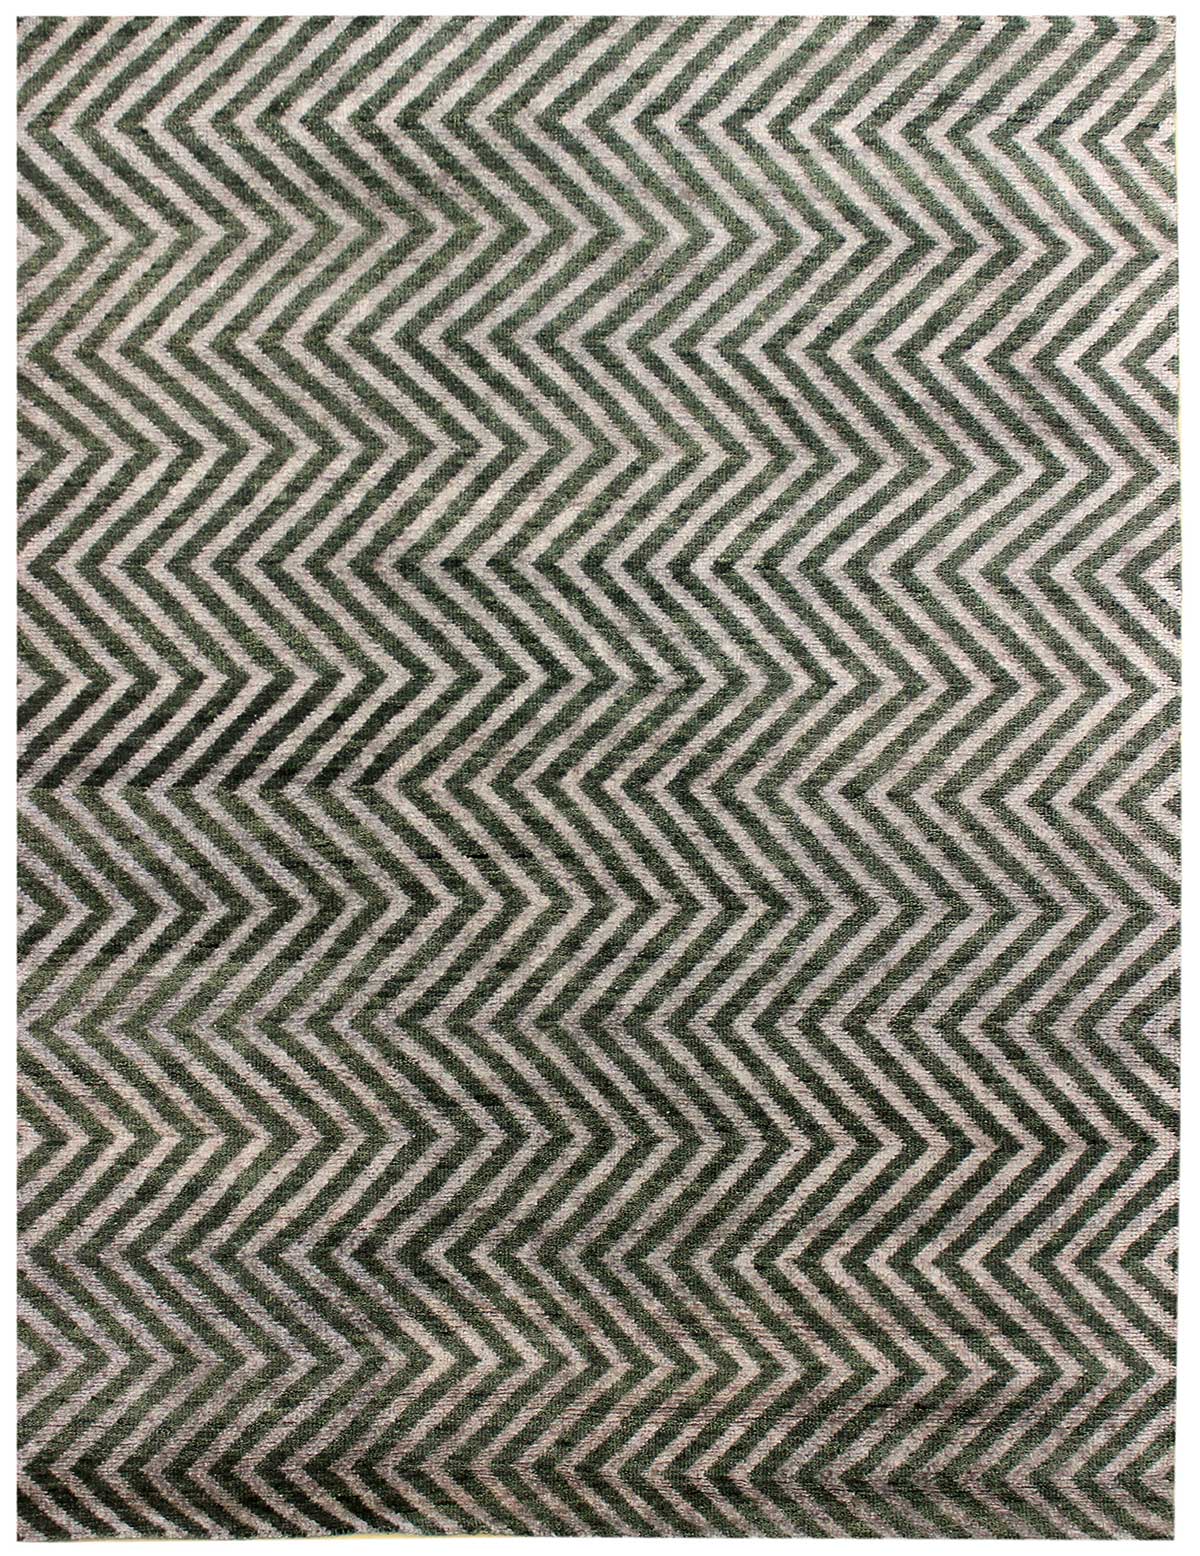 Zigzag Handwoven Transitional Rug